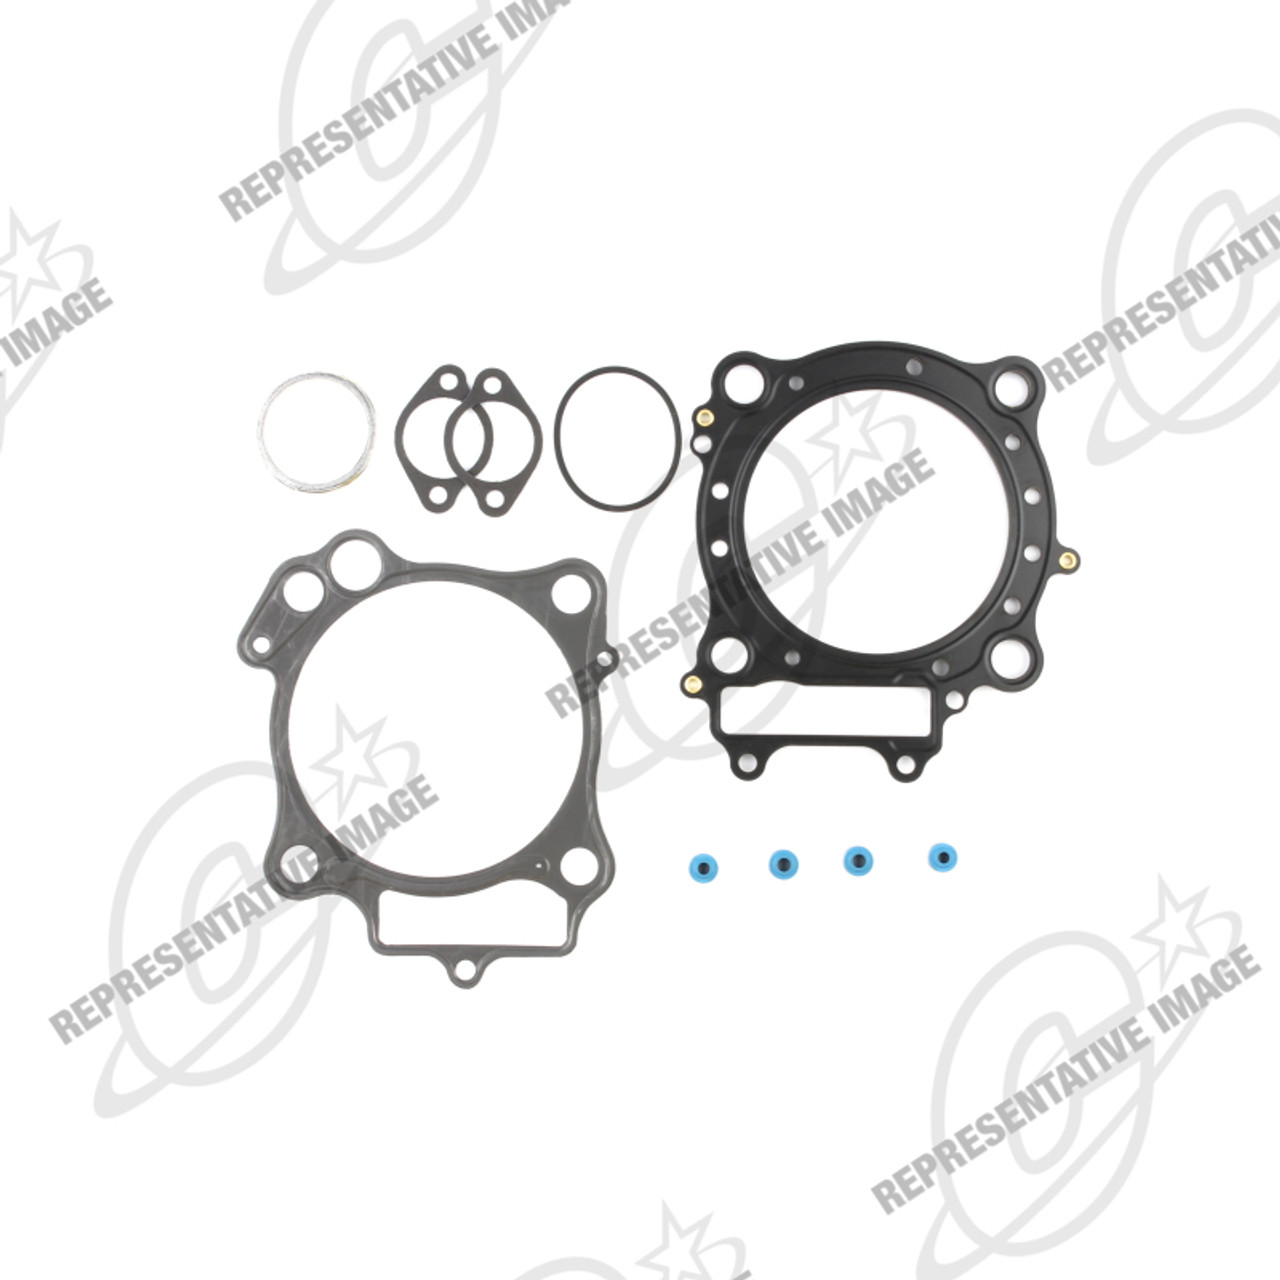 Cometic 02-04 Yamaha SX Viper 70mm Bore Exhaust Valve Gasket Kit - C4036PV Photo - Primary